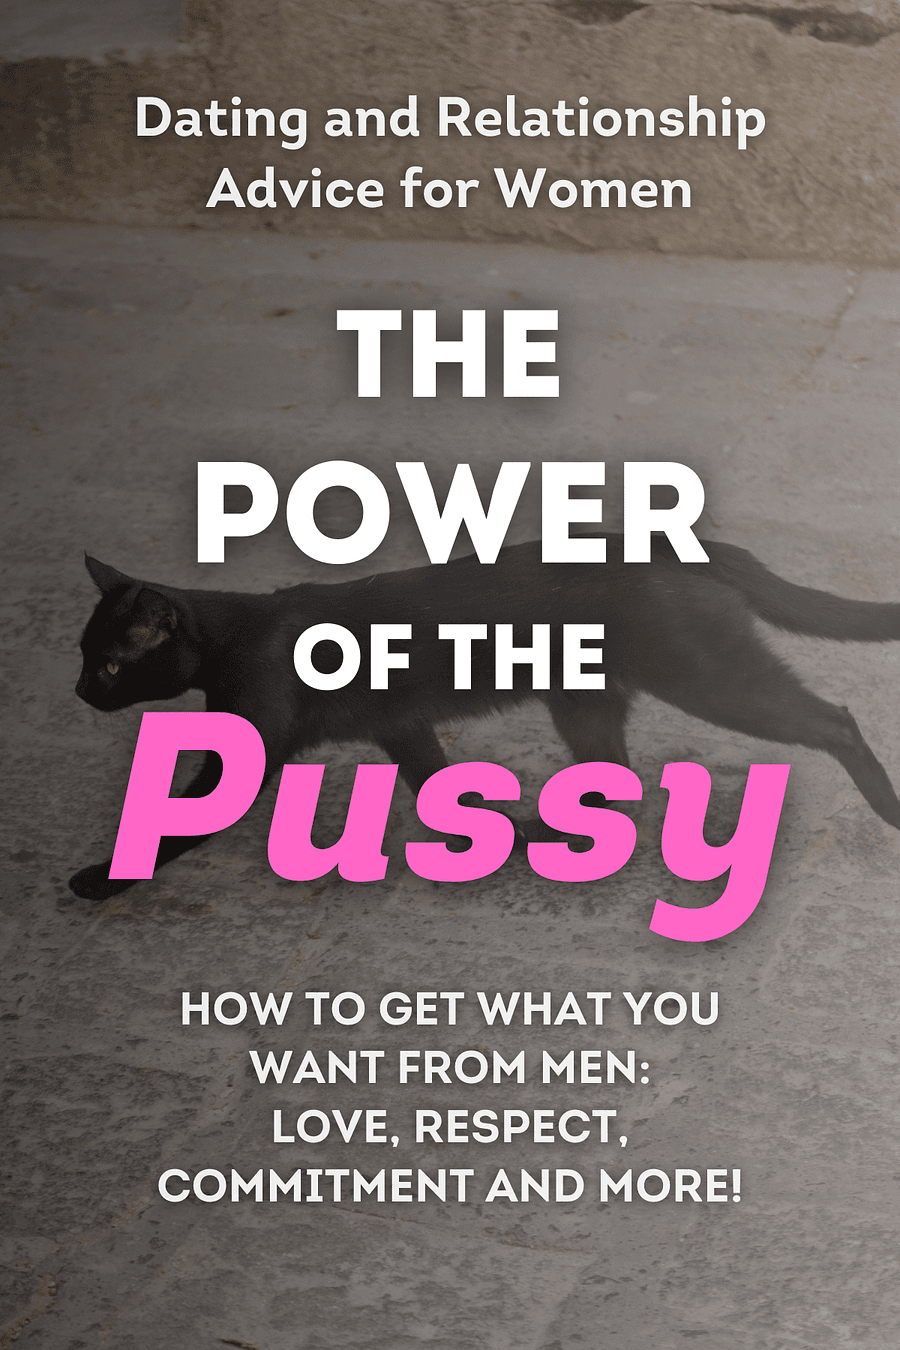 The Power of the Pussy - How to Get What You Want From Men by Kara King - Book Summary